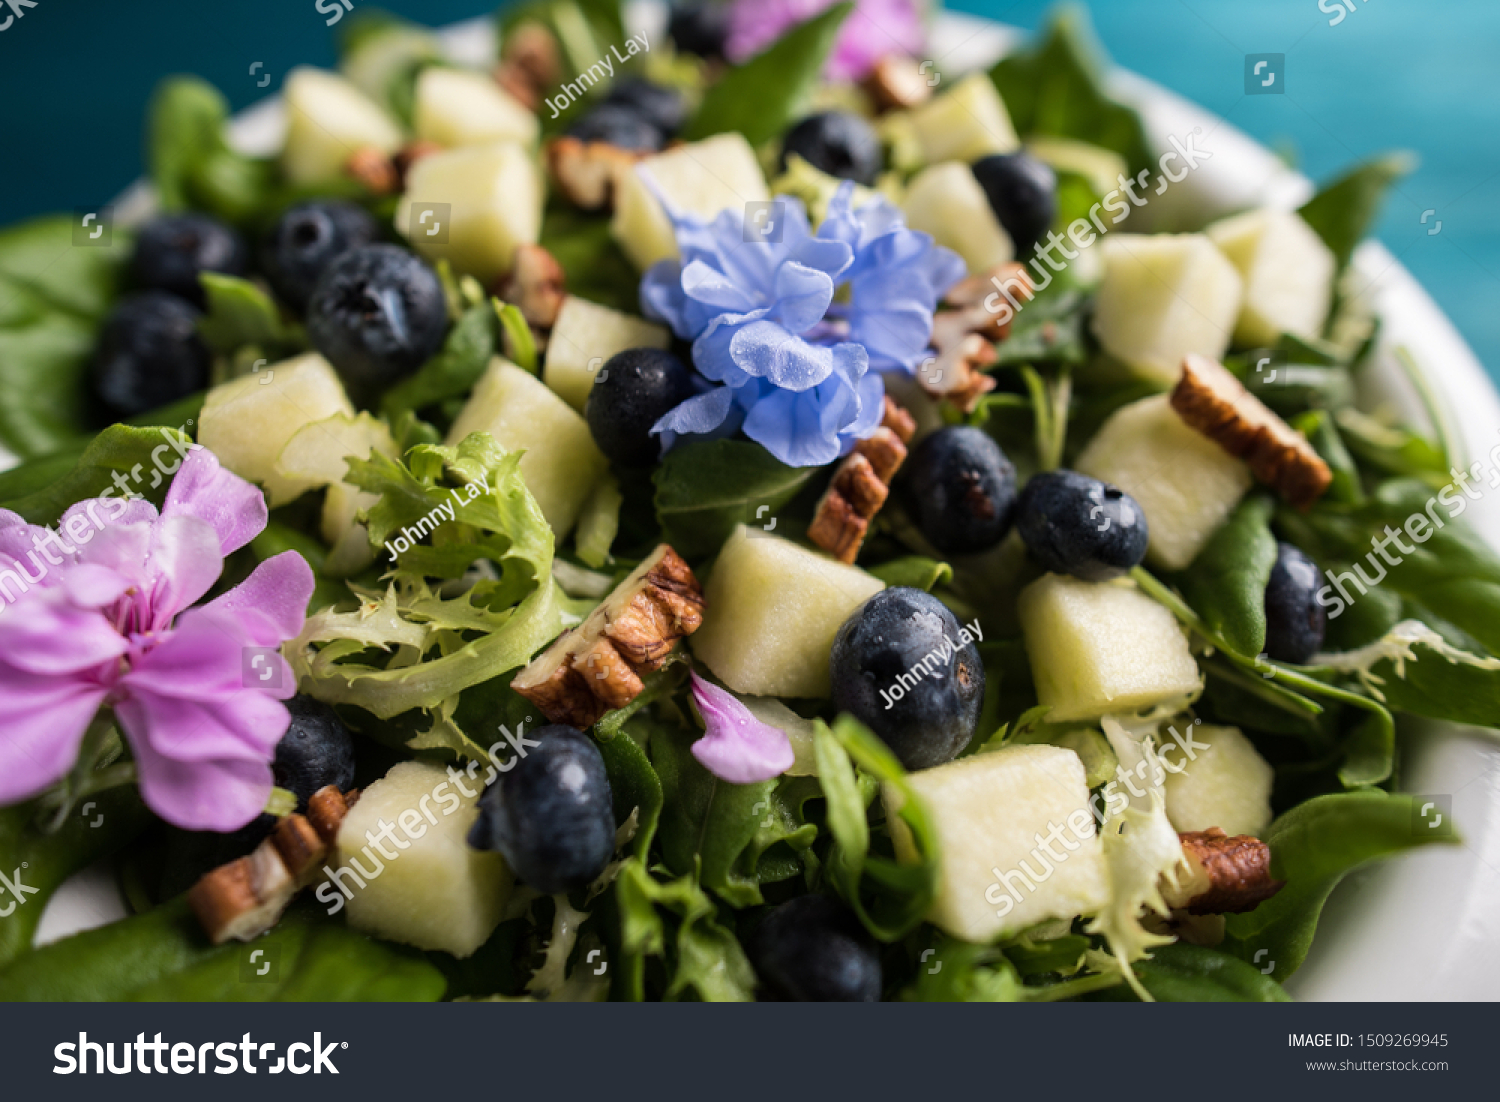 Salad with comestible flowers and grapes. #1509269945